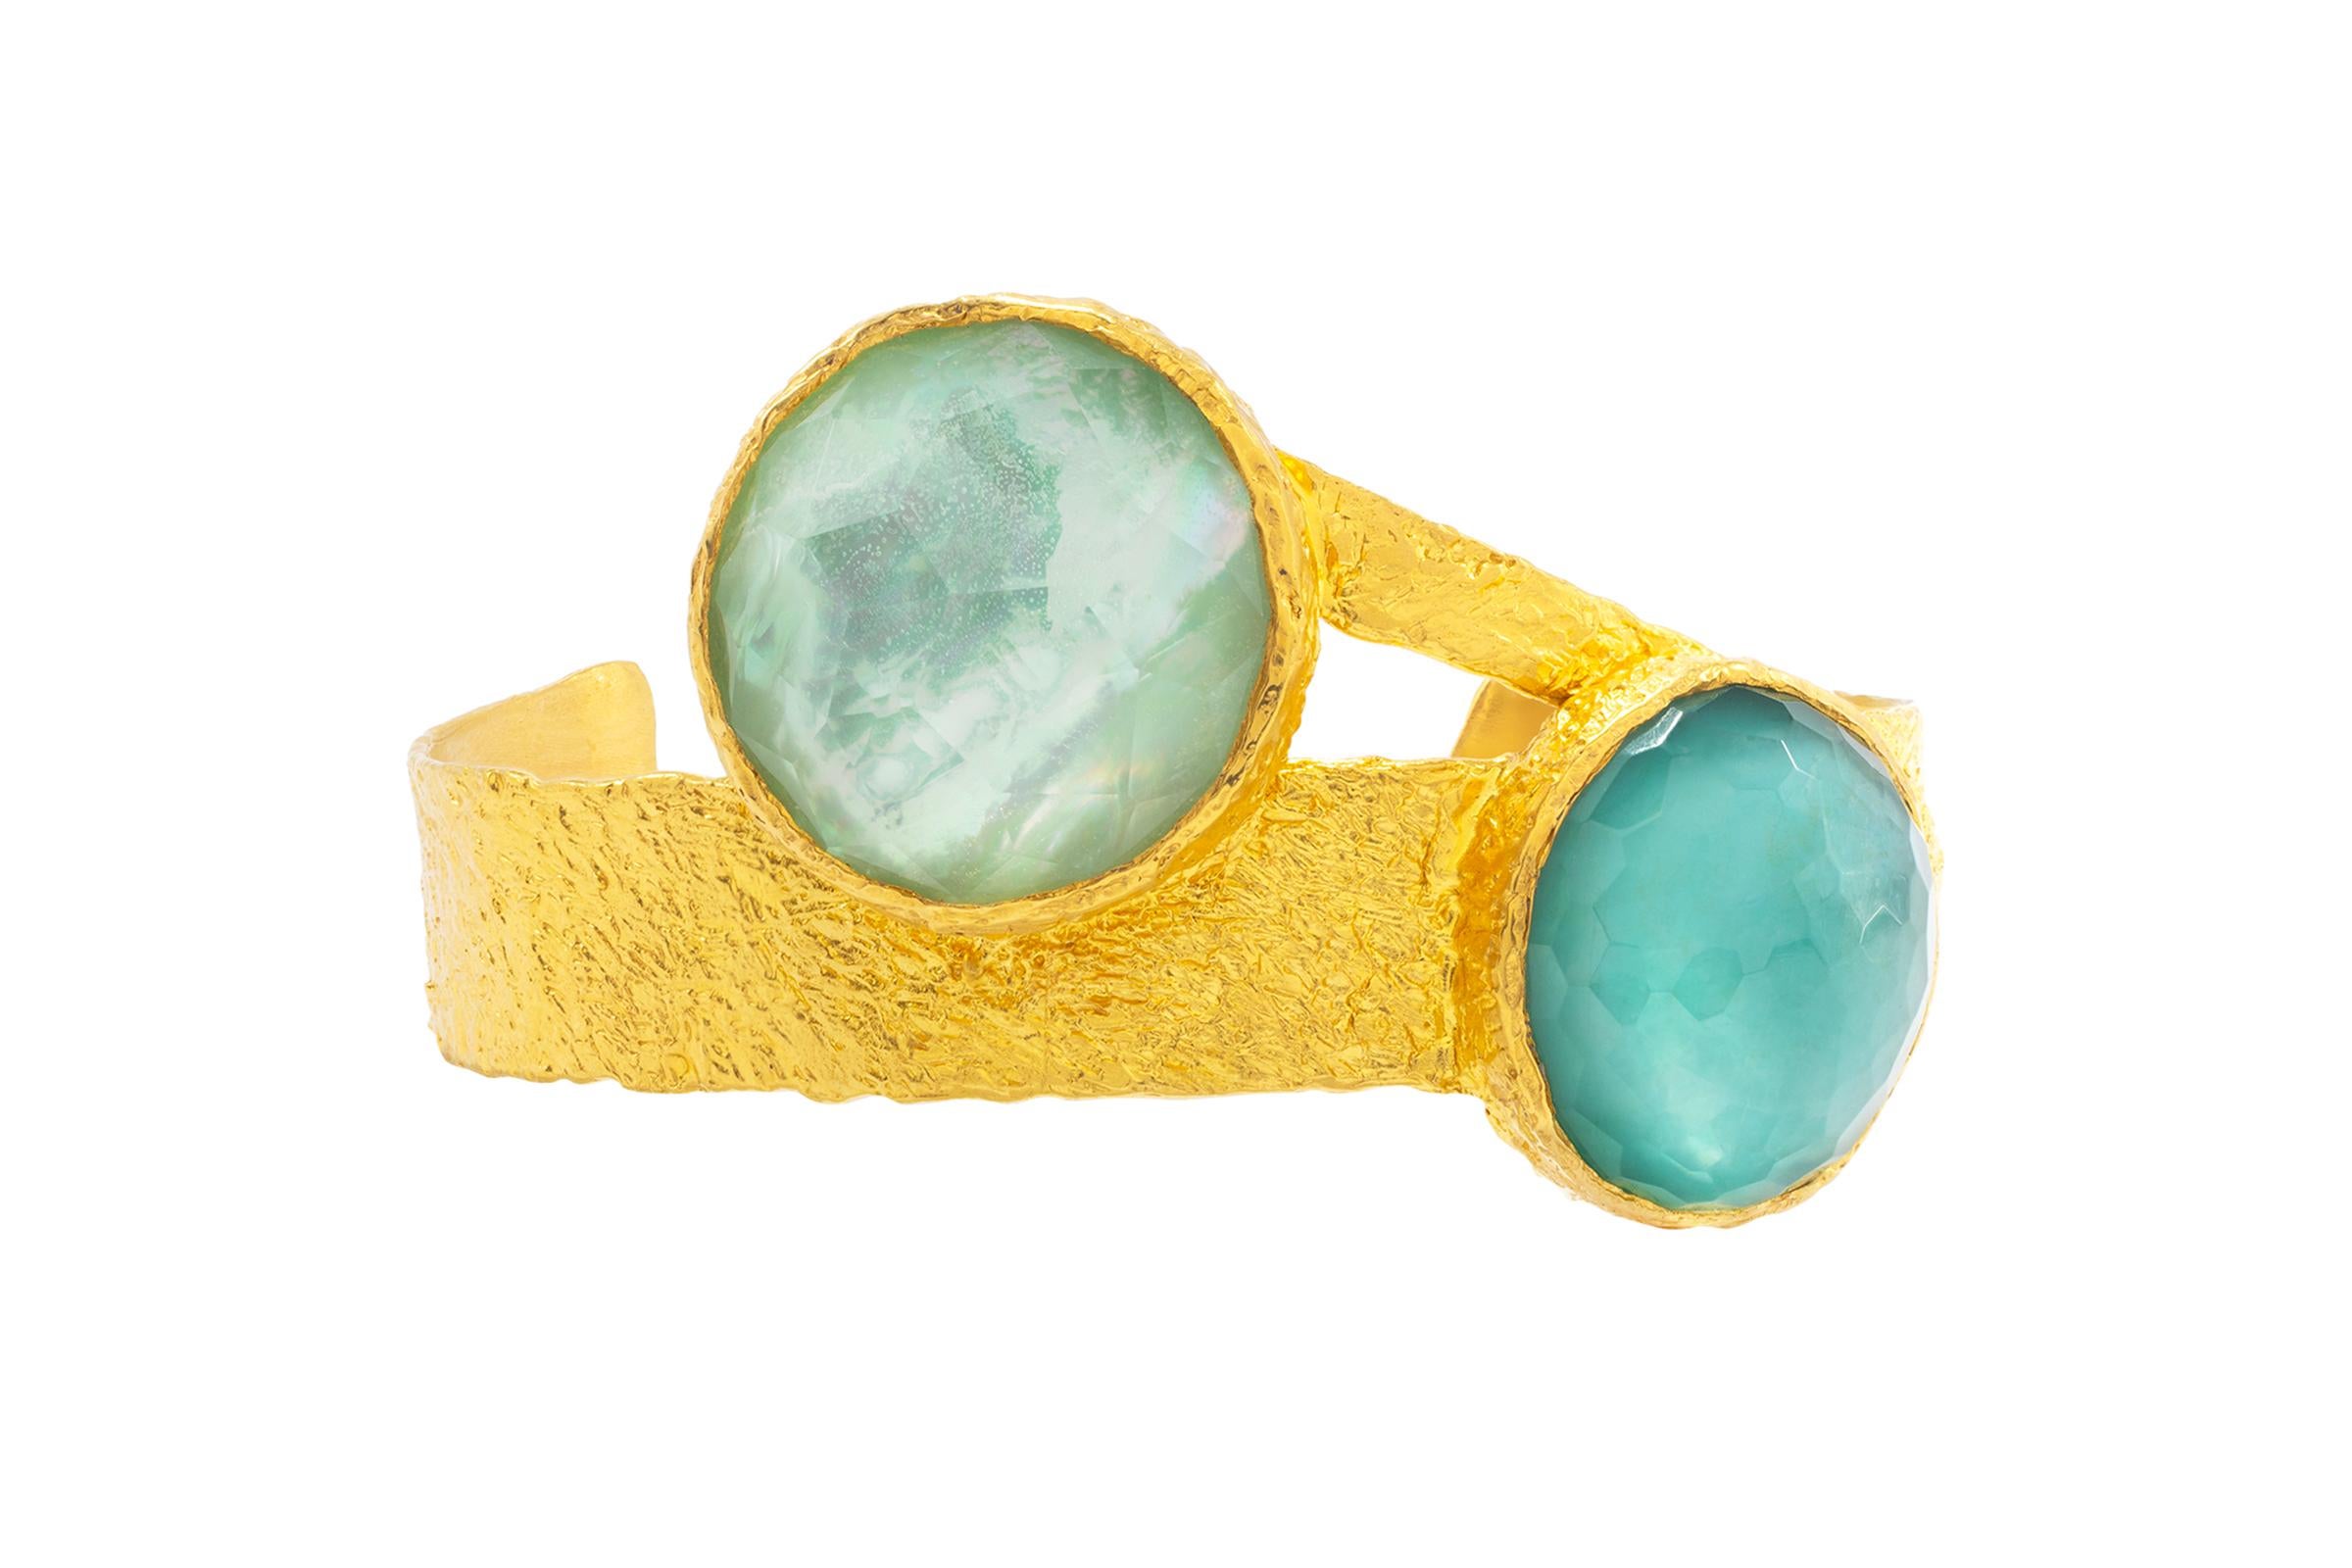 Eclipse 22k Gold Cuff with Turquoise, Pearl and Quartz, by Tagili 1